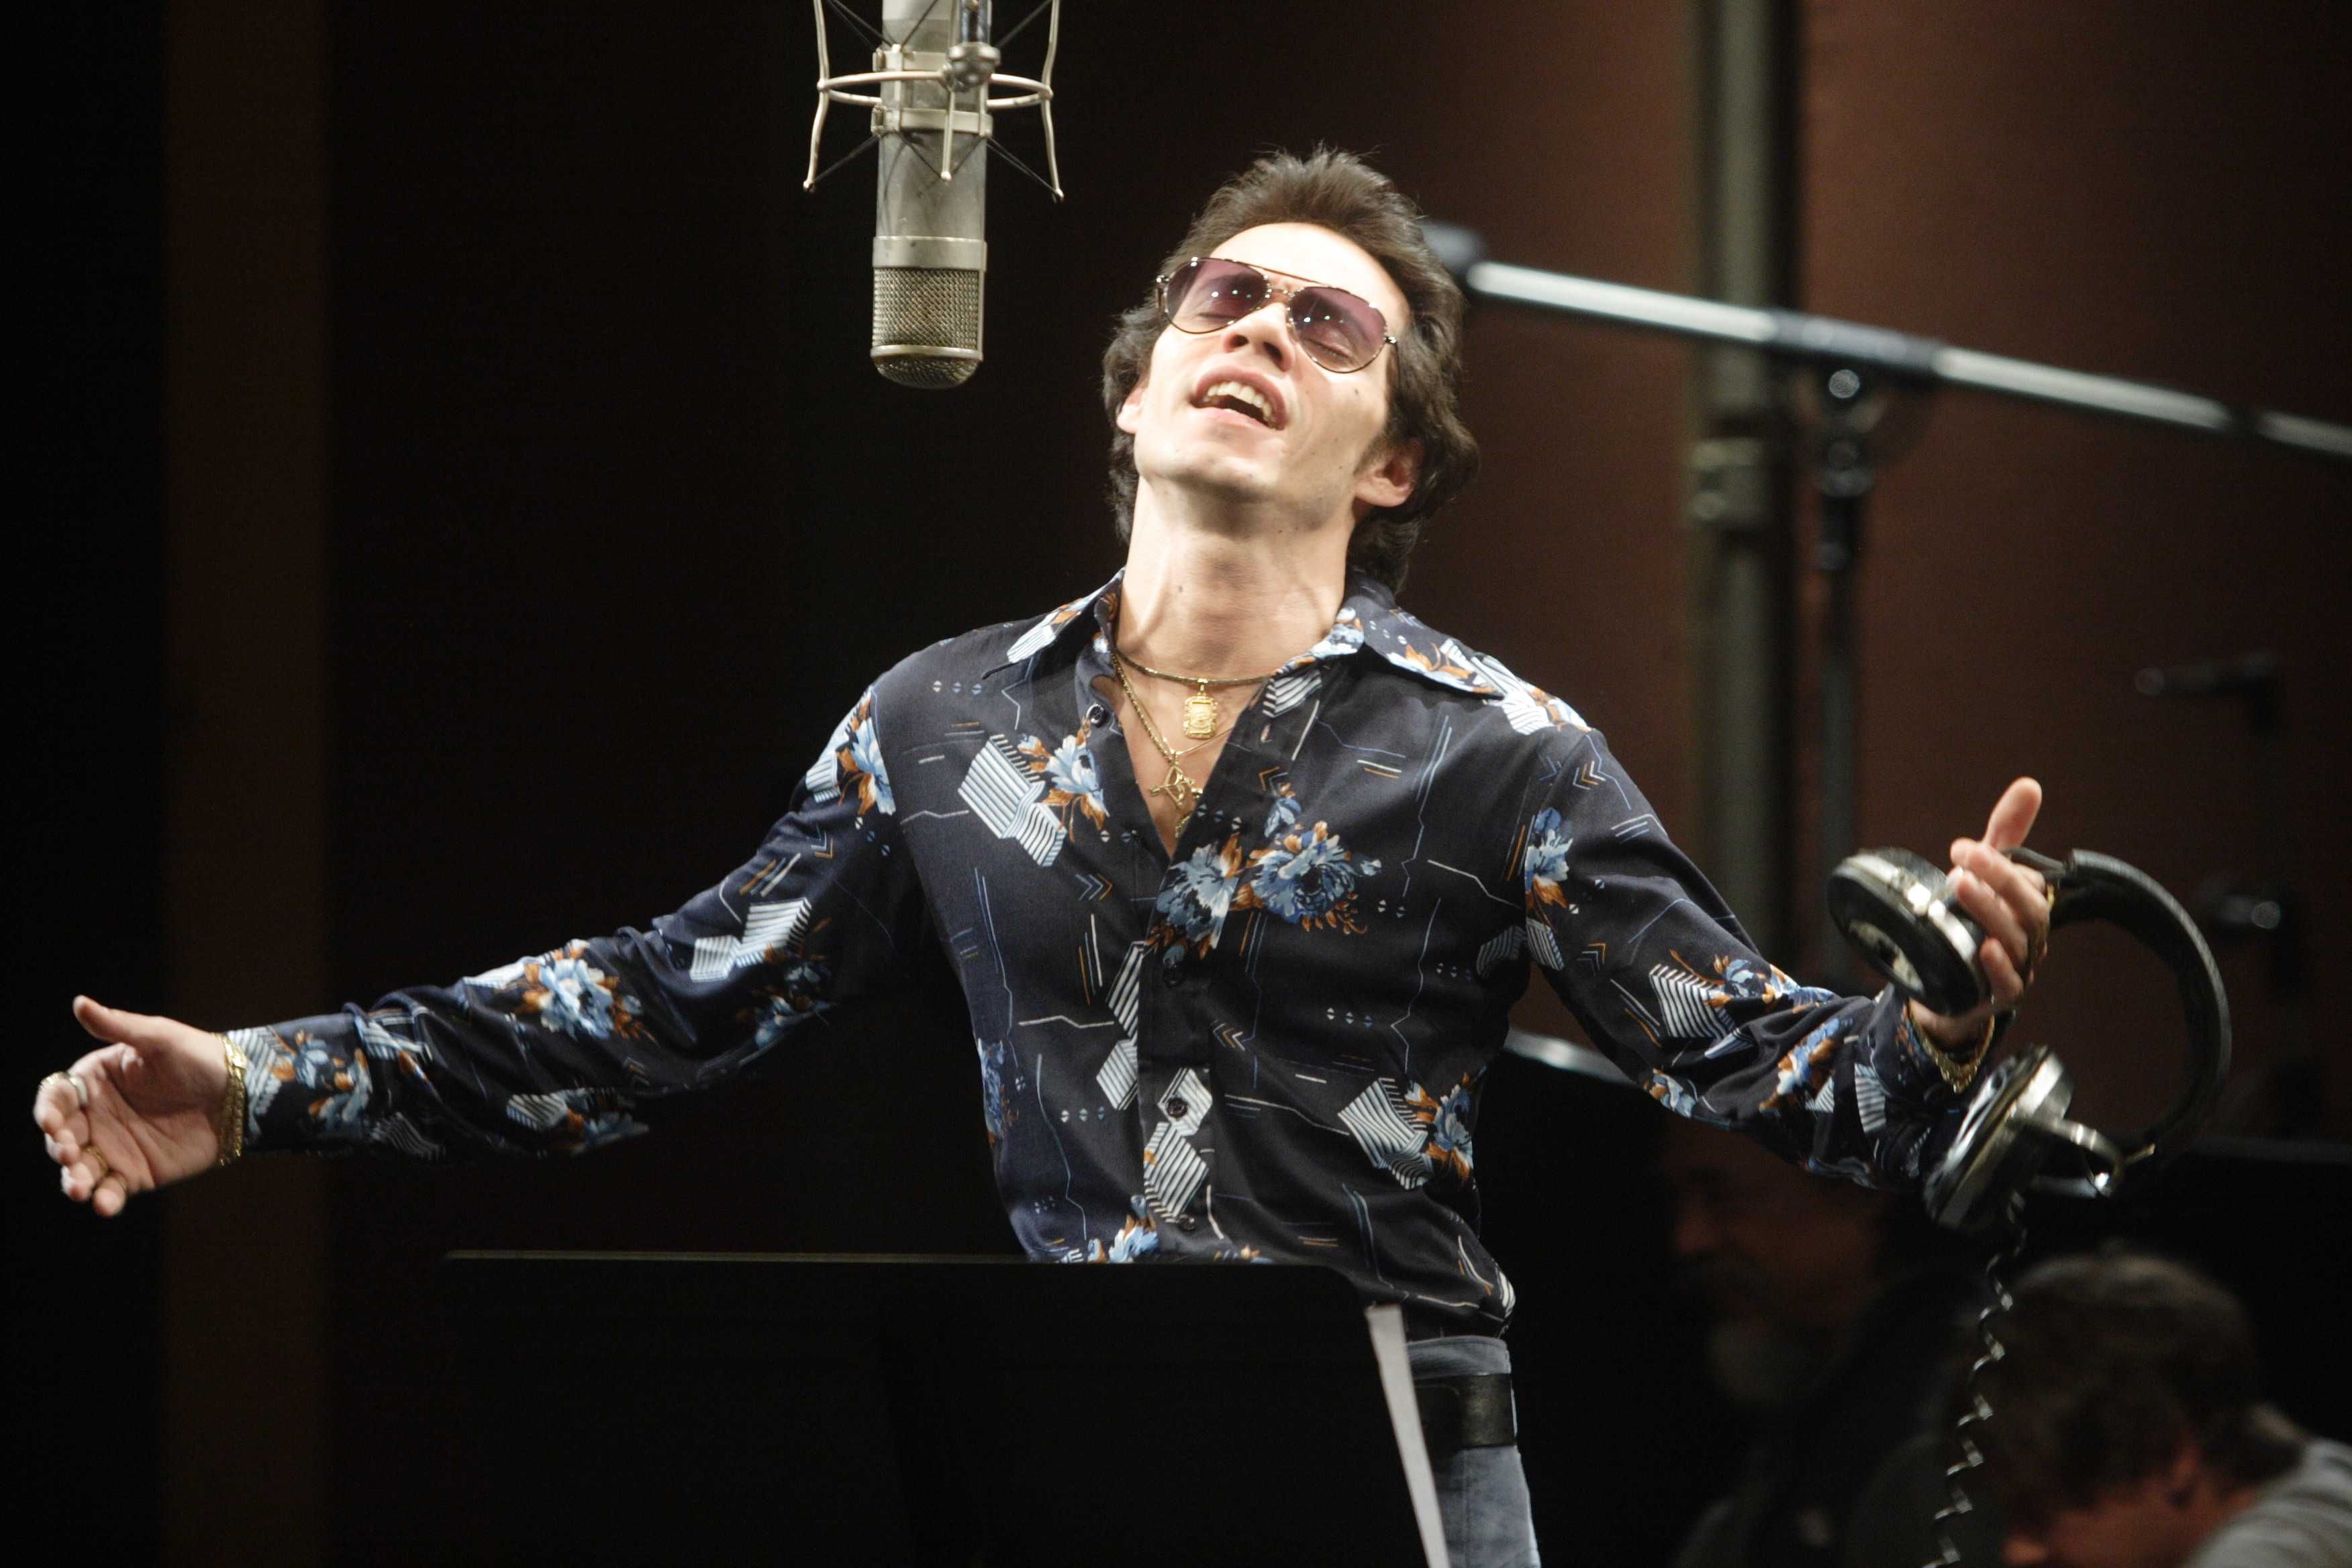 Marc Anthony as Hector Lavoe. Hector lavoe, Marc anthony, Hector